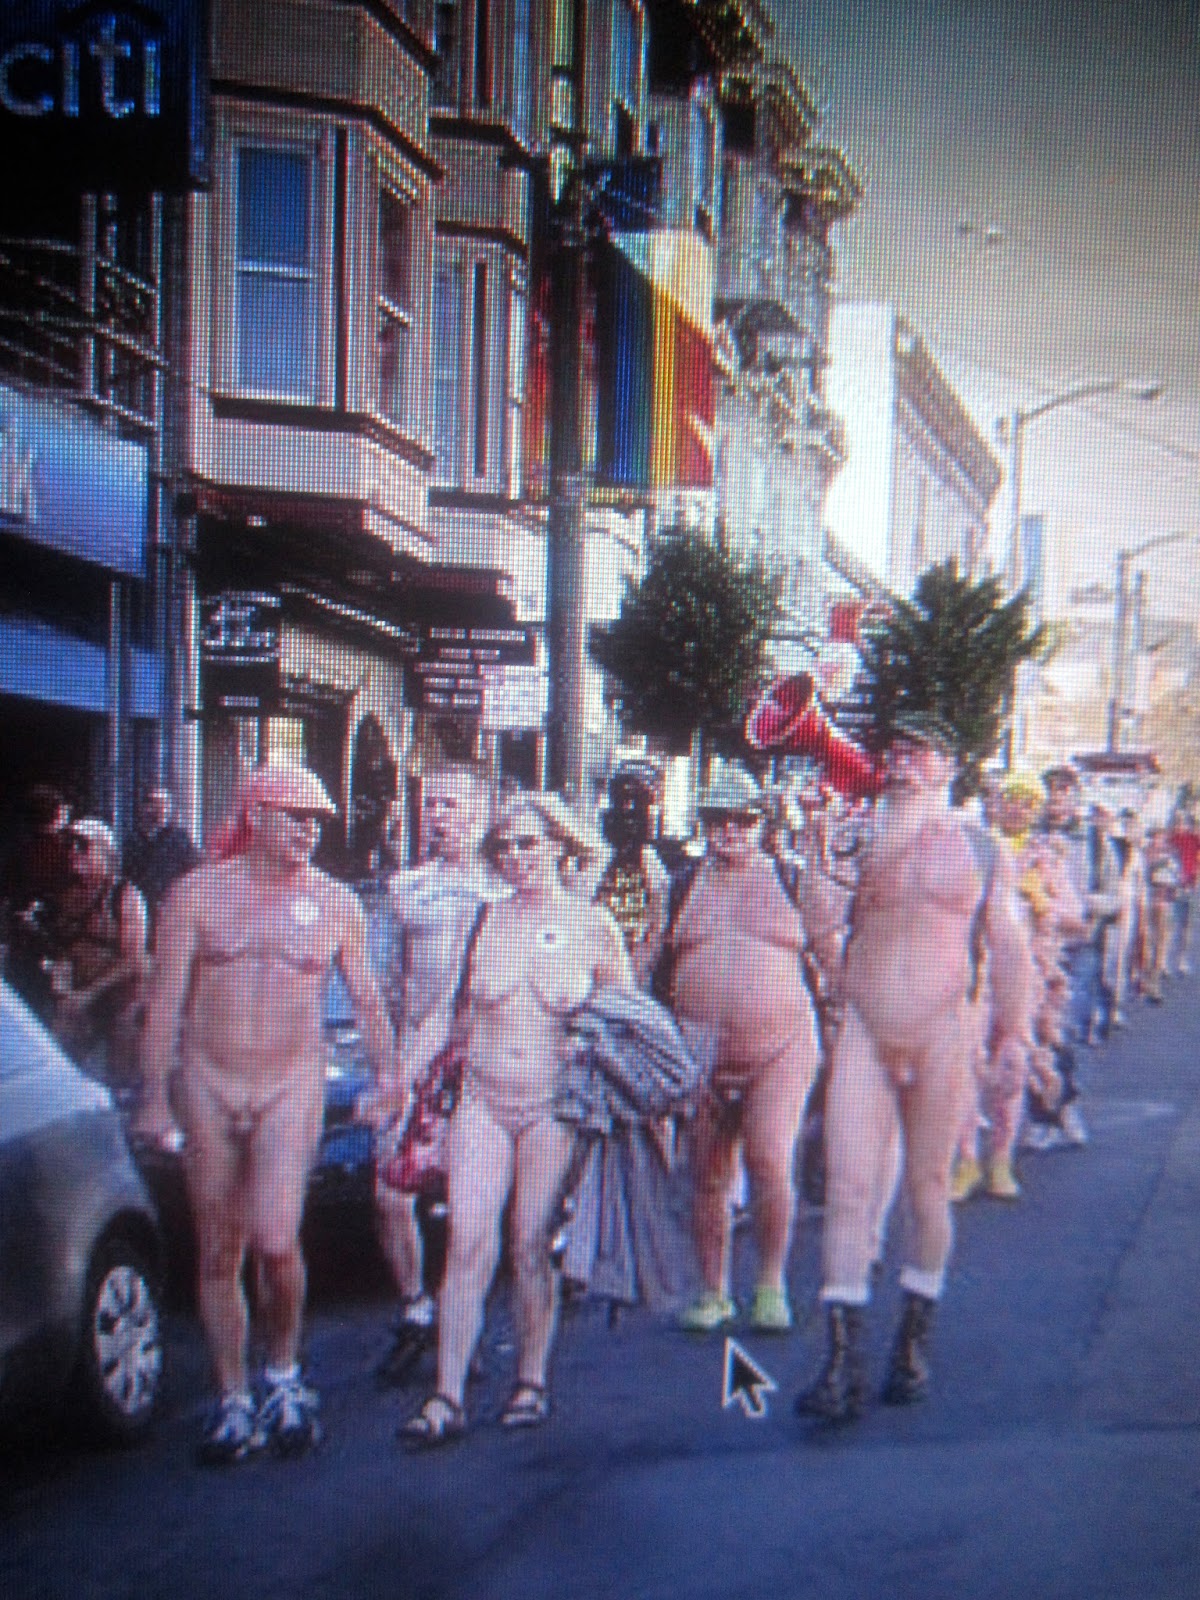 Porno Only In San Francisco: Cops Can't Force Naked Men To Put On Clot...